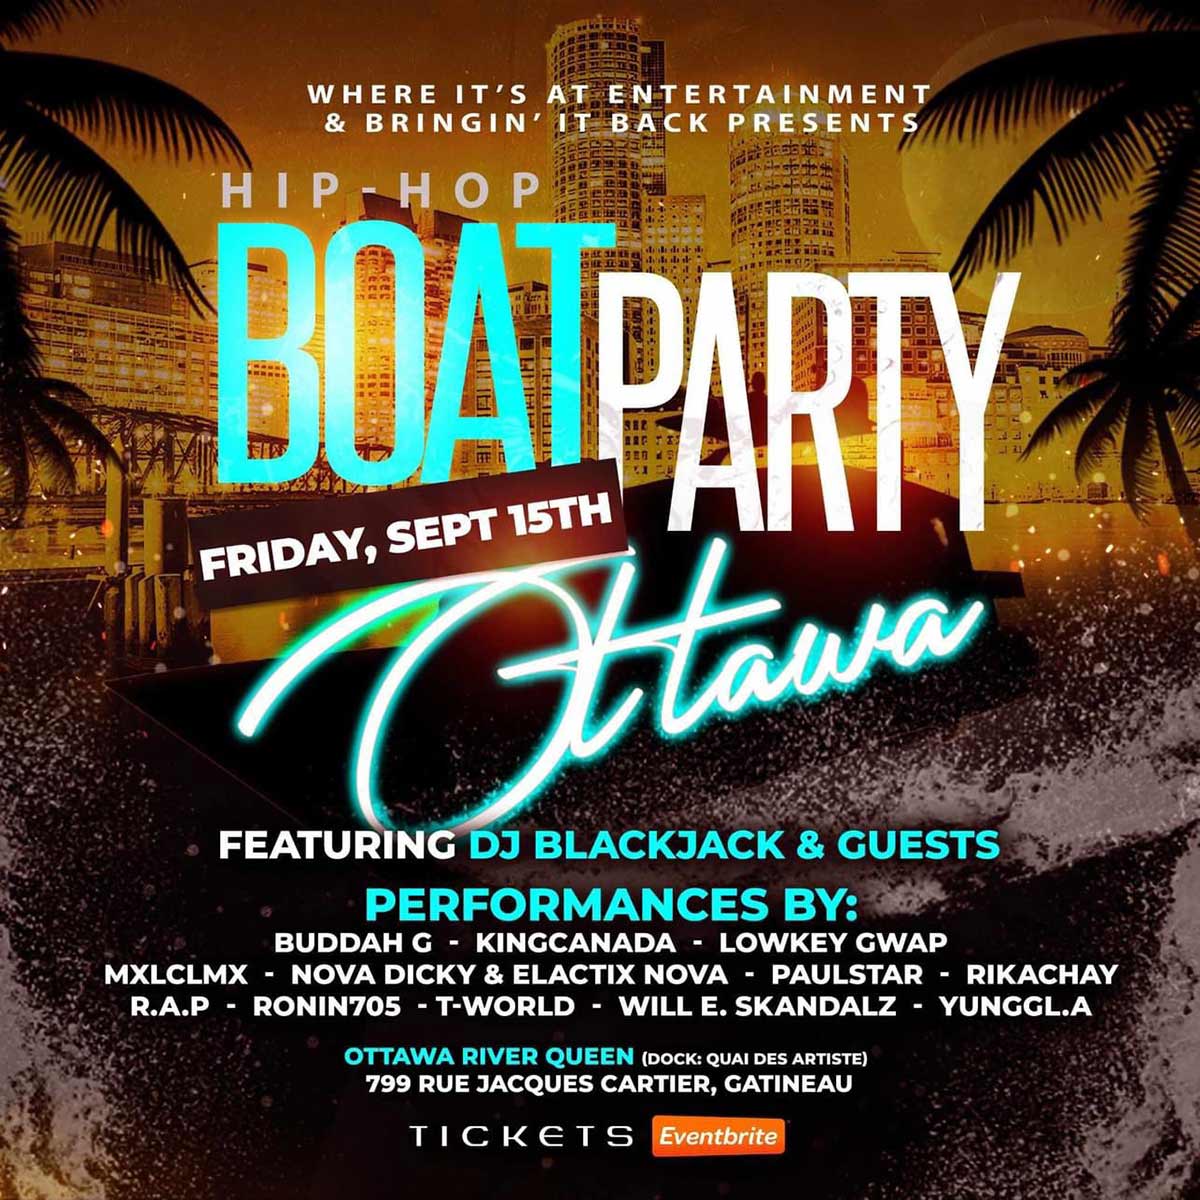 Promotional poster for Hip Hop Boat Party Ottawa